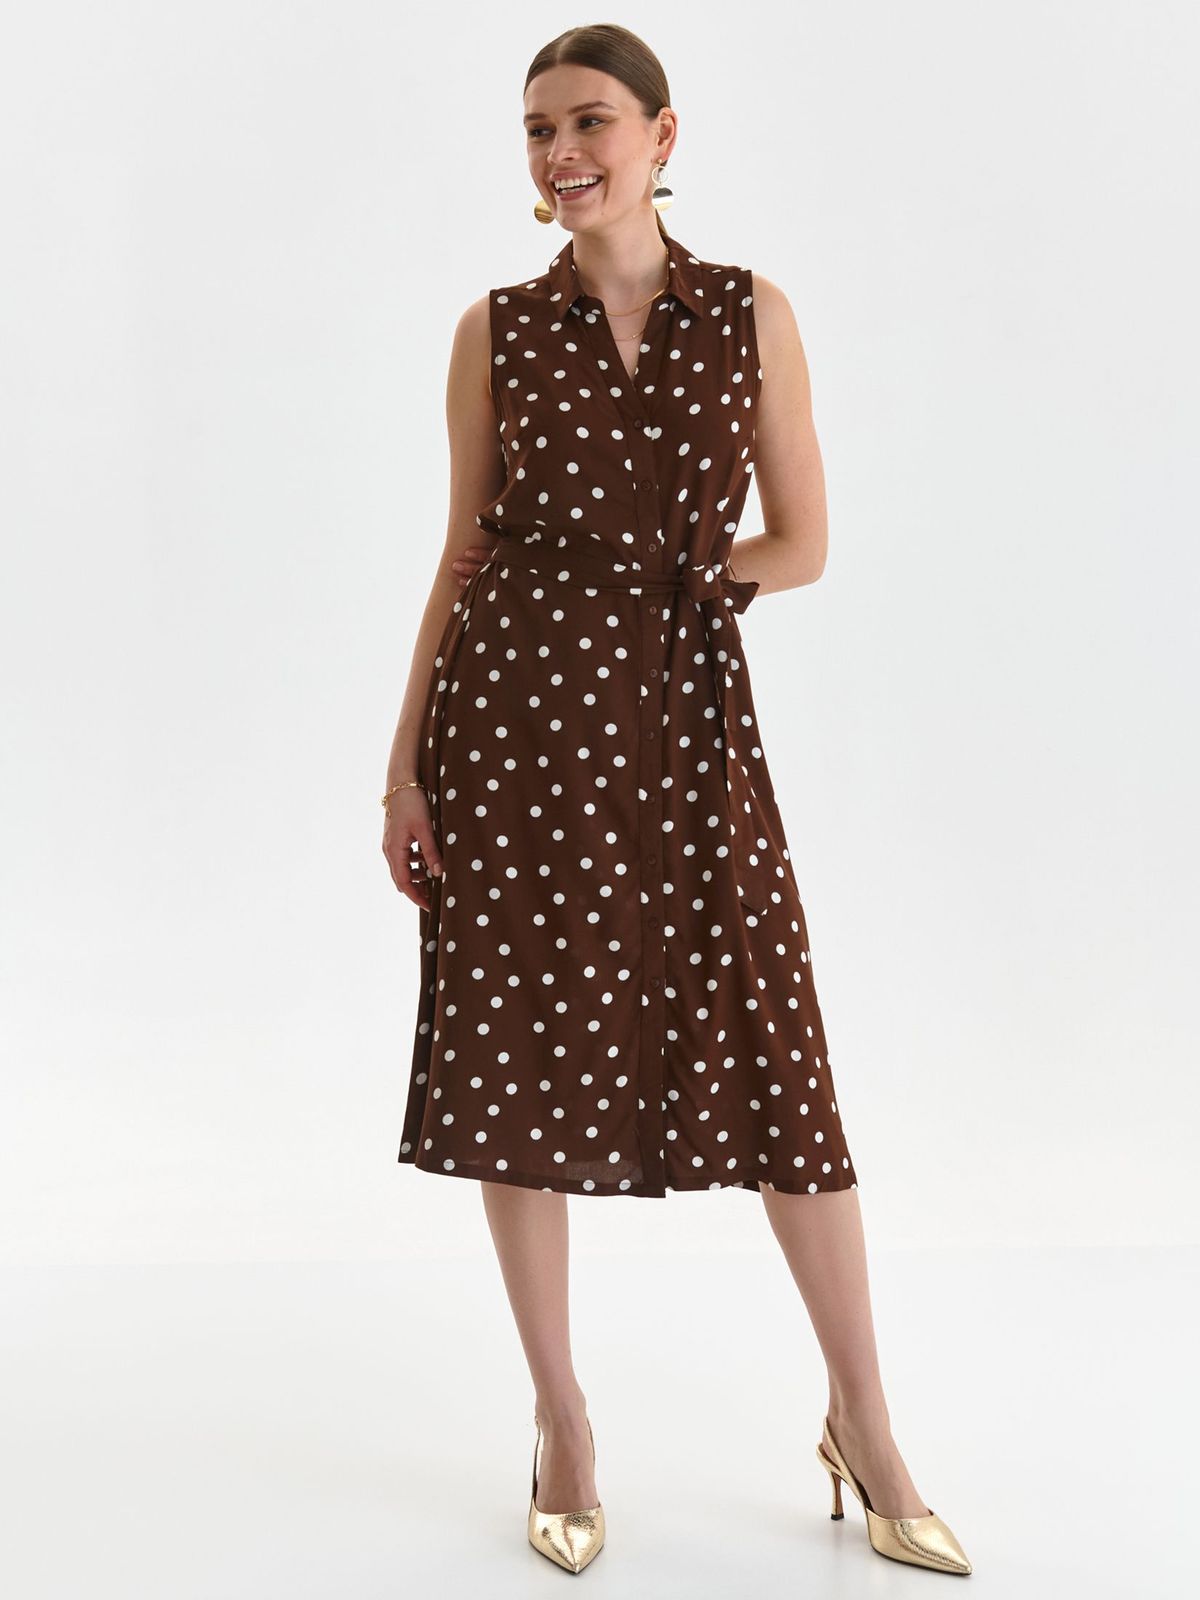 Brown dress light material shirt dress accessorized with tied waistband 2 - StarShinerS.com